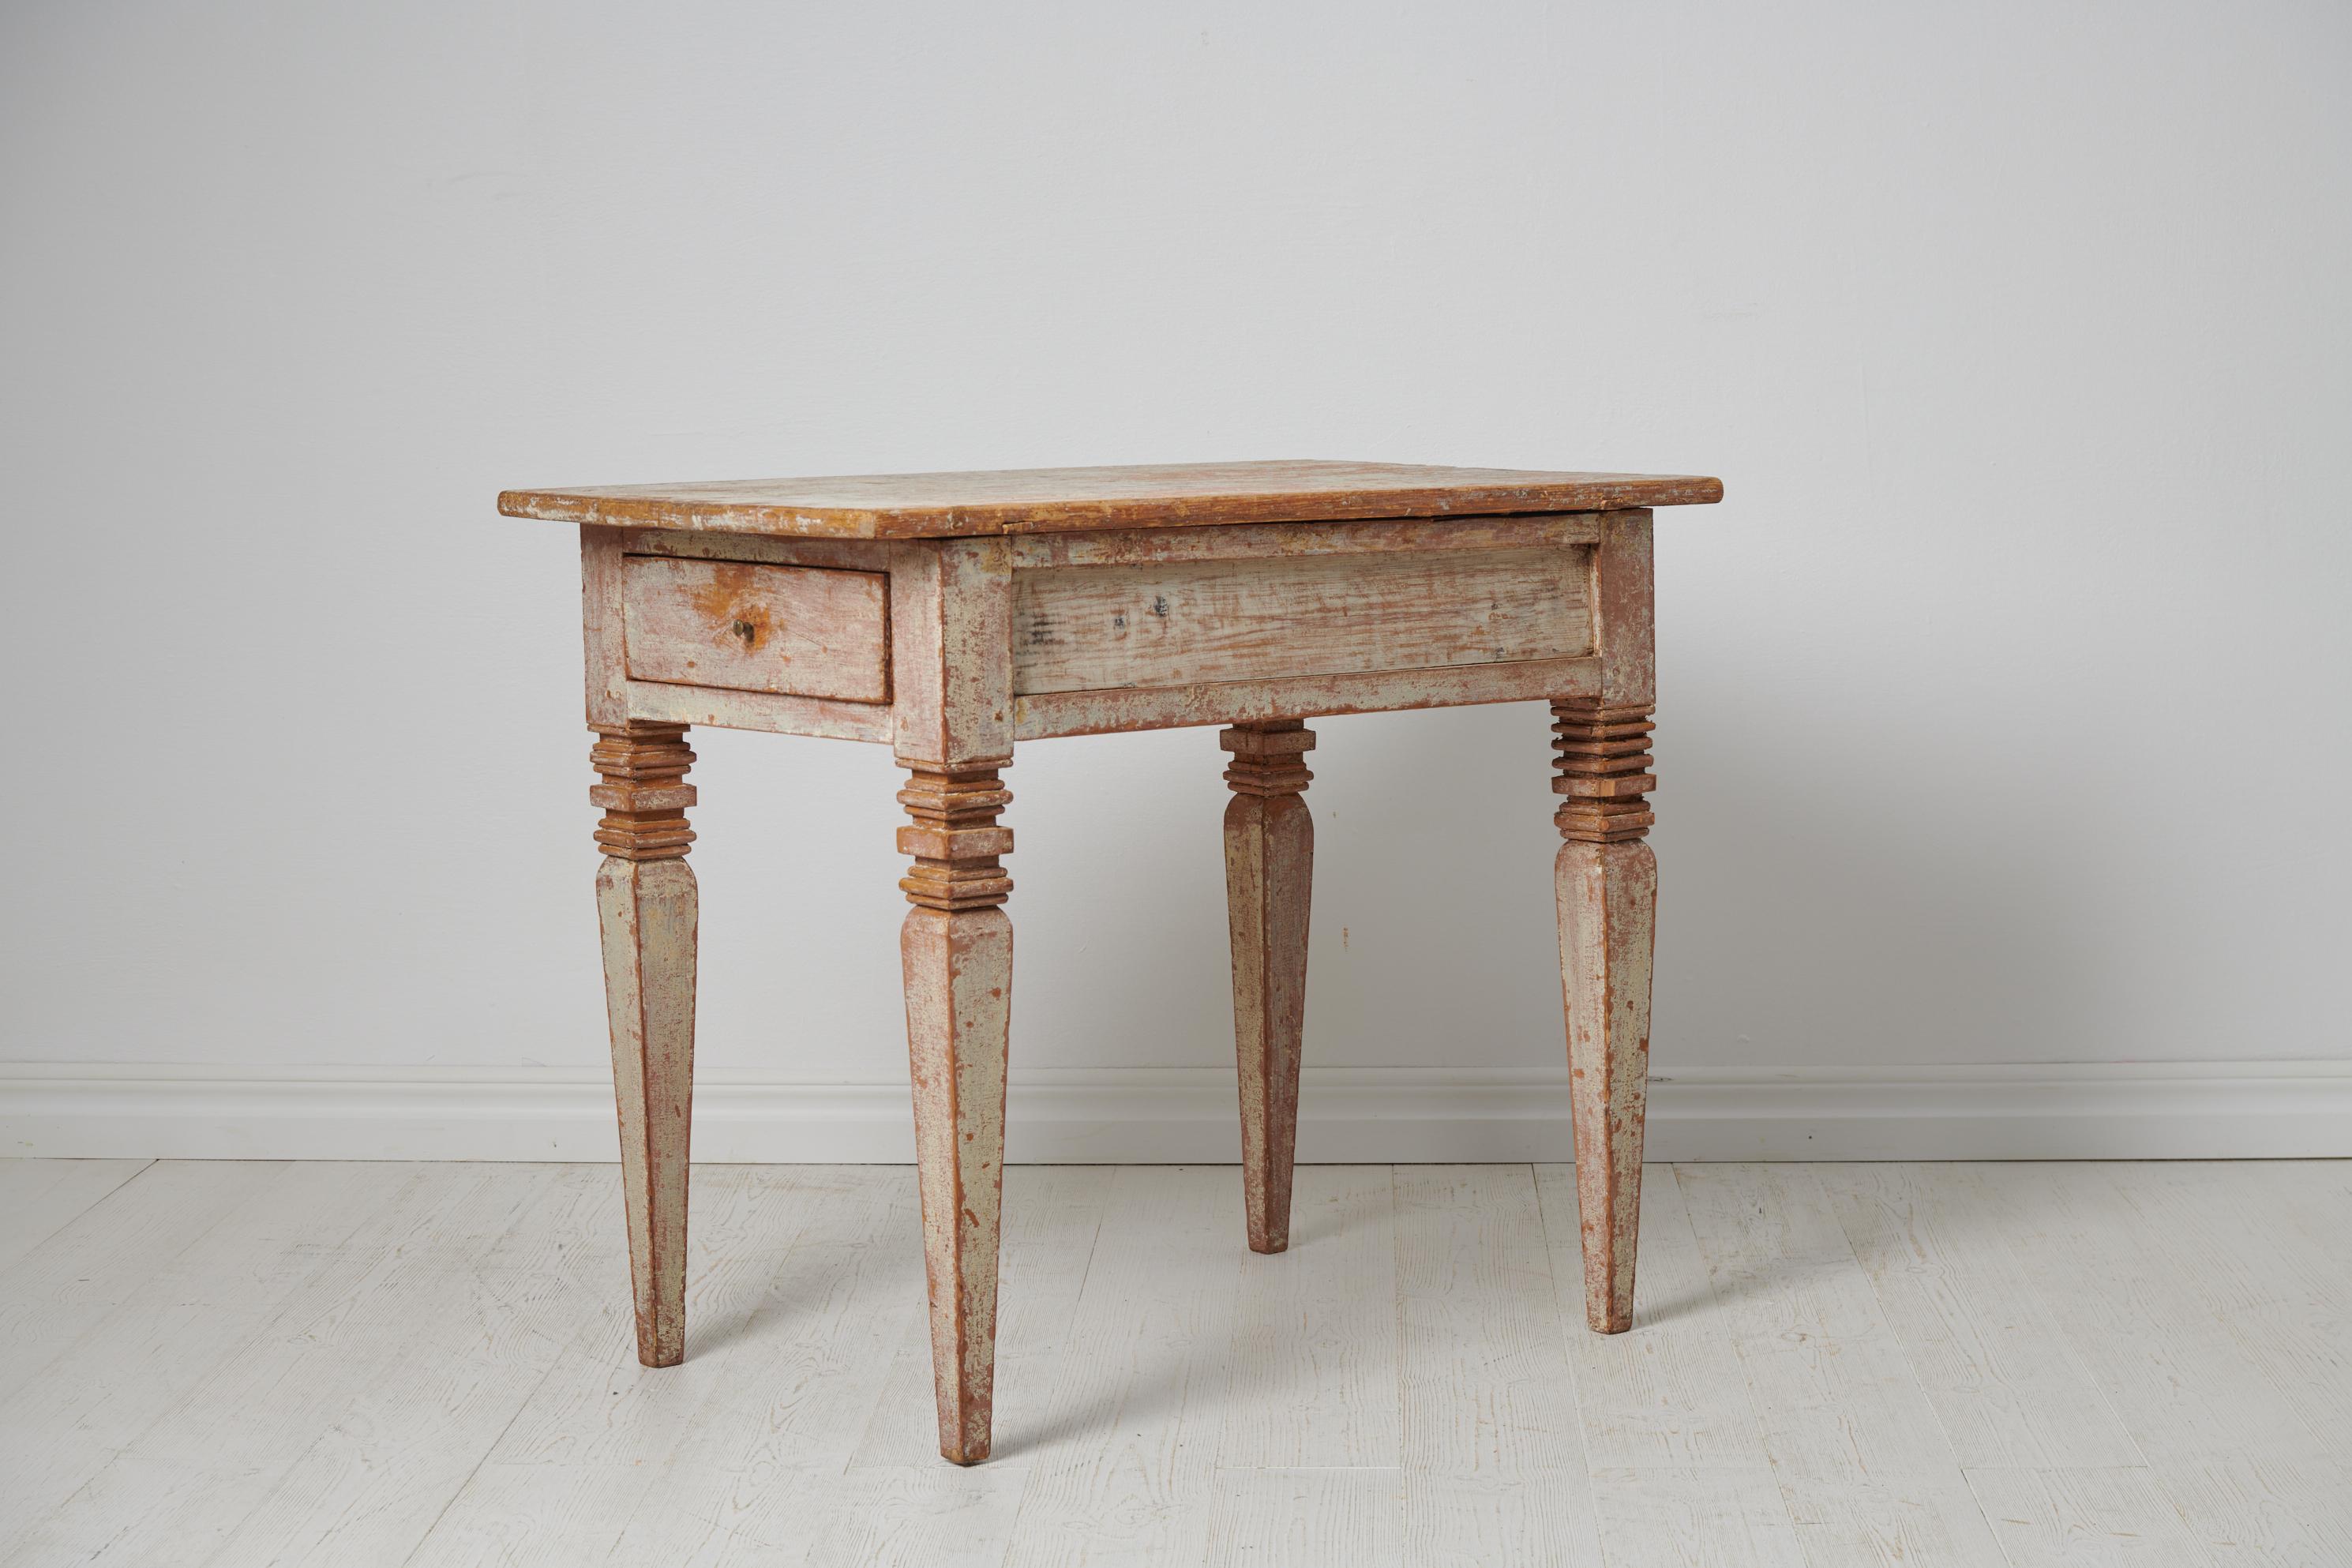 Antique Swedish gustavian table from around 1810. The table is gustavian, also known as neoclassic, and made in solid Swedish pine. The table has the original paint with a rustic character with genuine patina and distress after 200 years of use. It